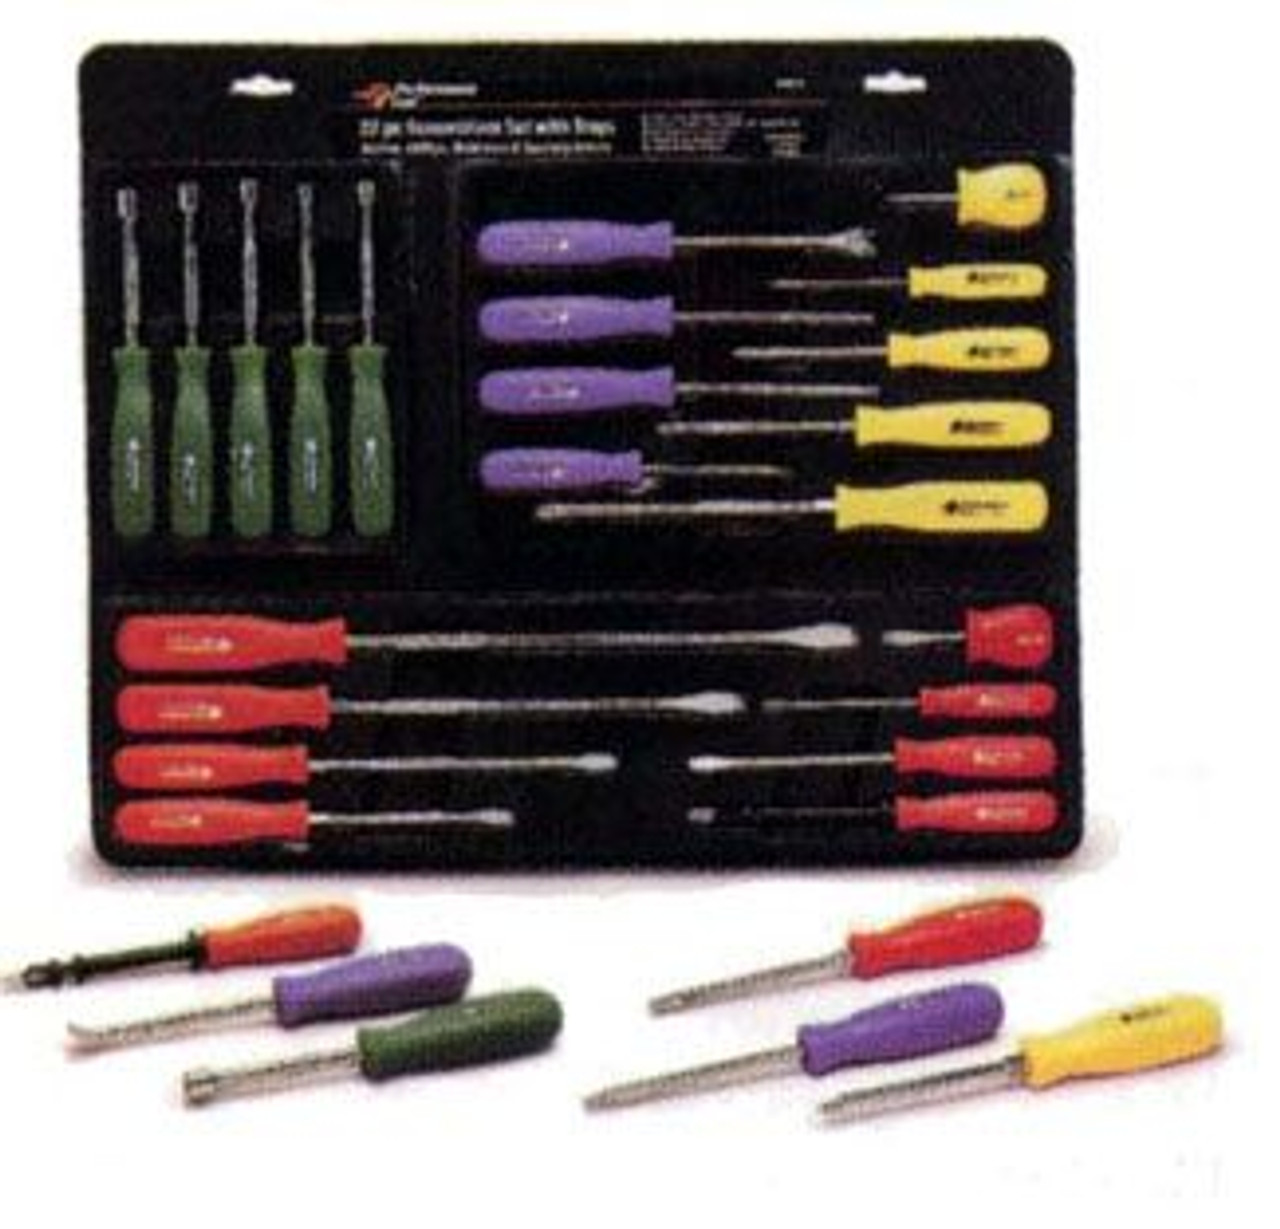 22 PC Screwdriver Set with Trays